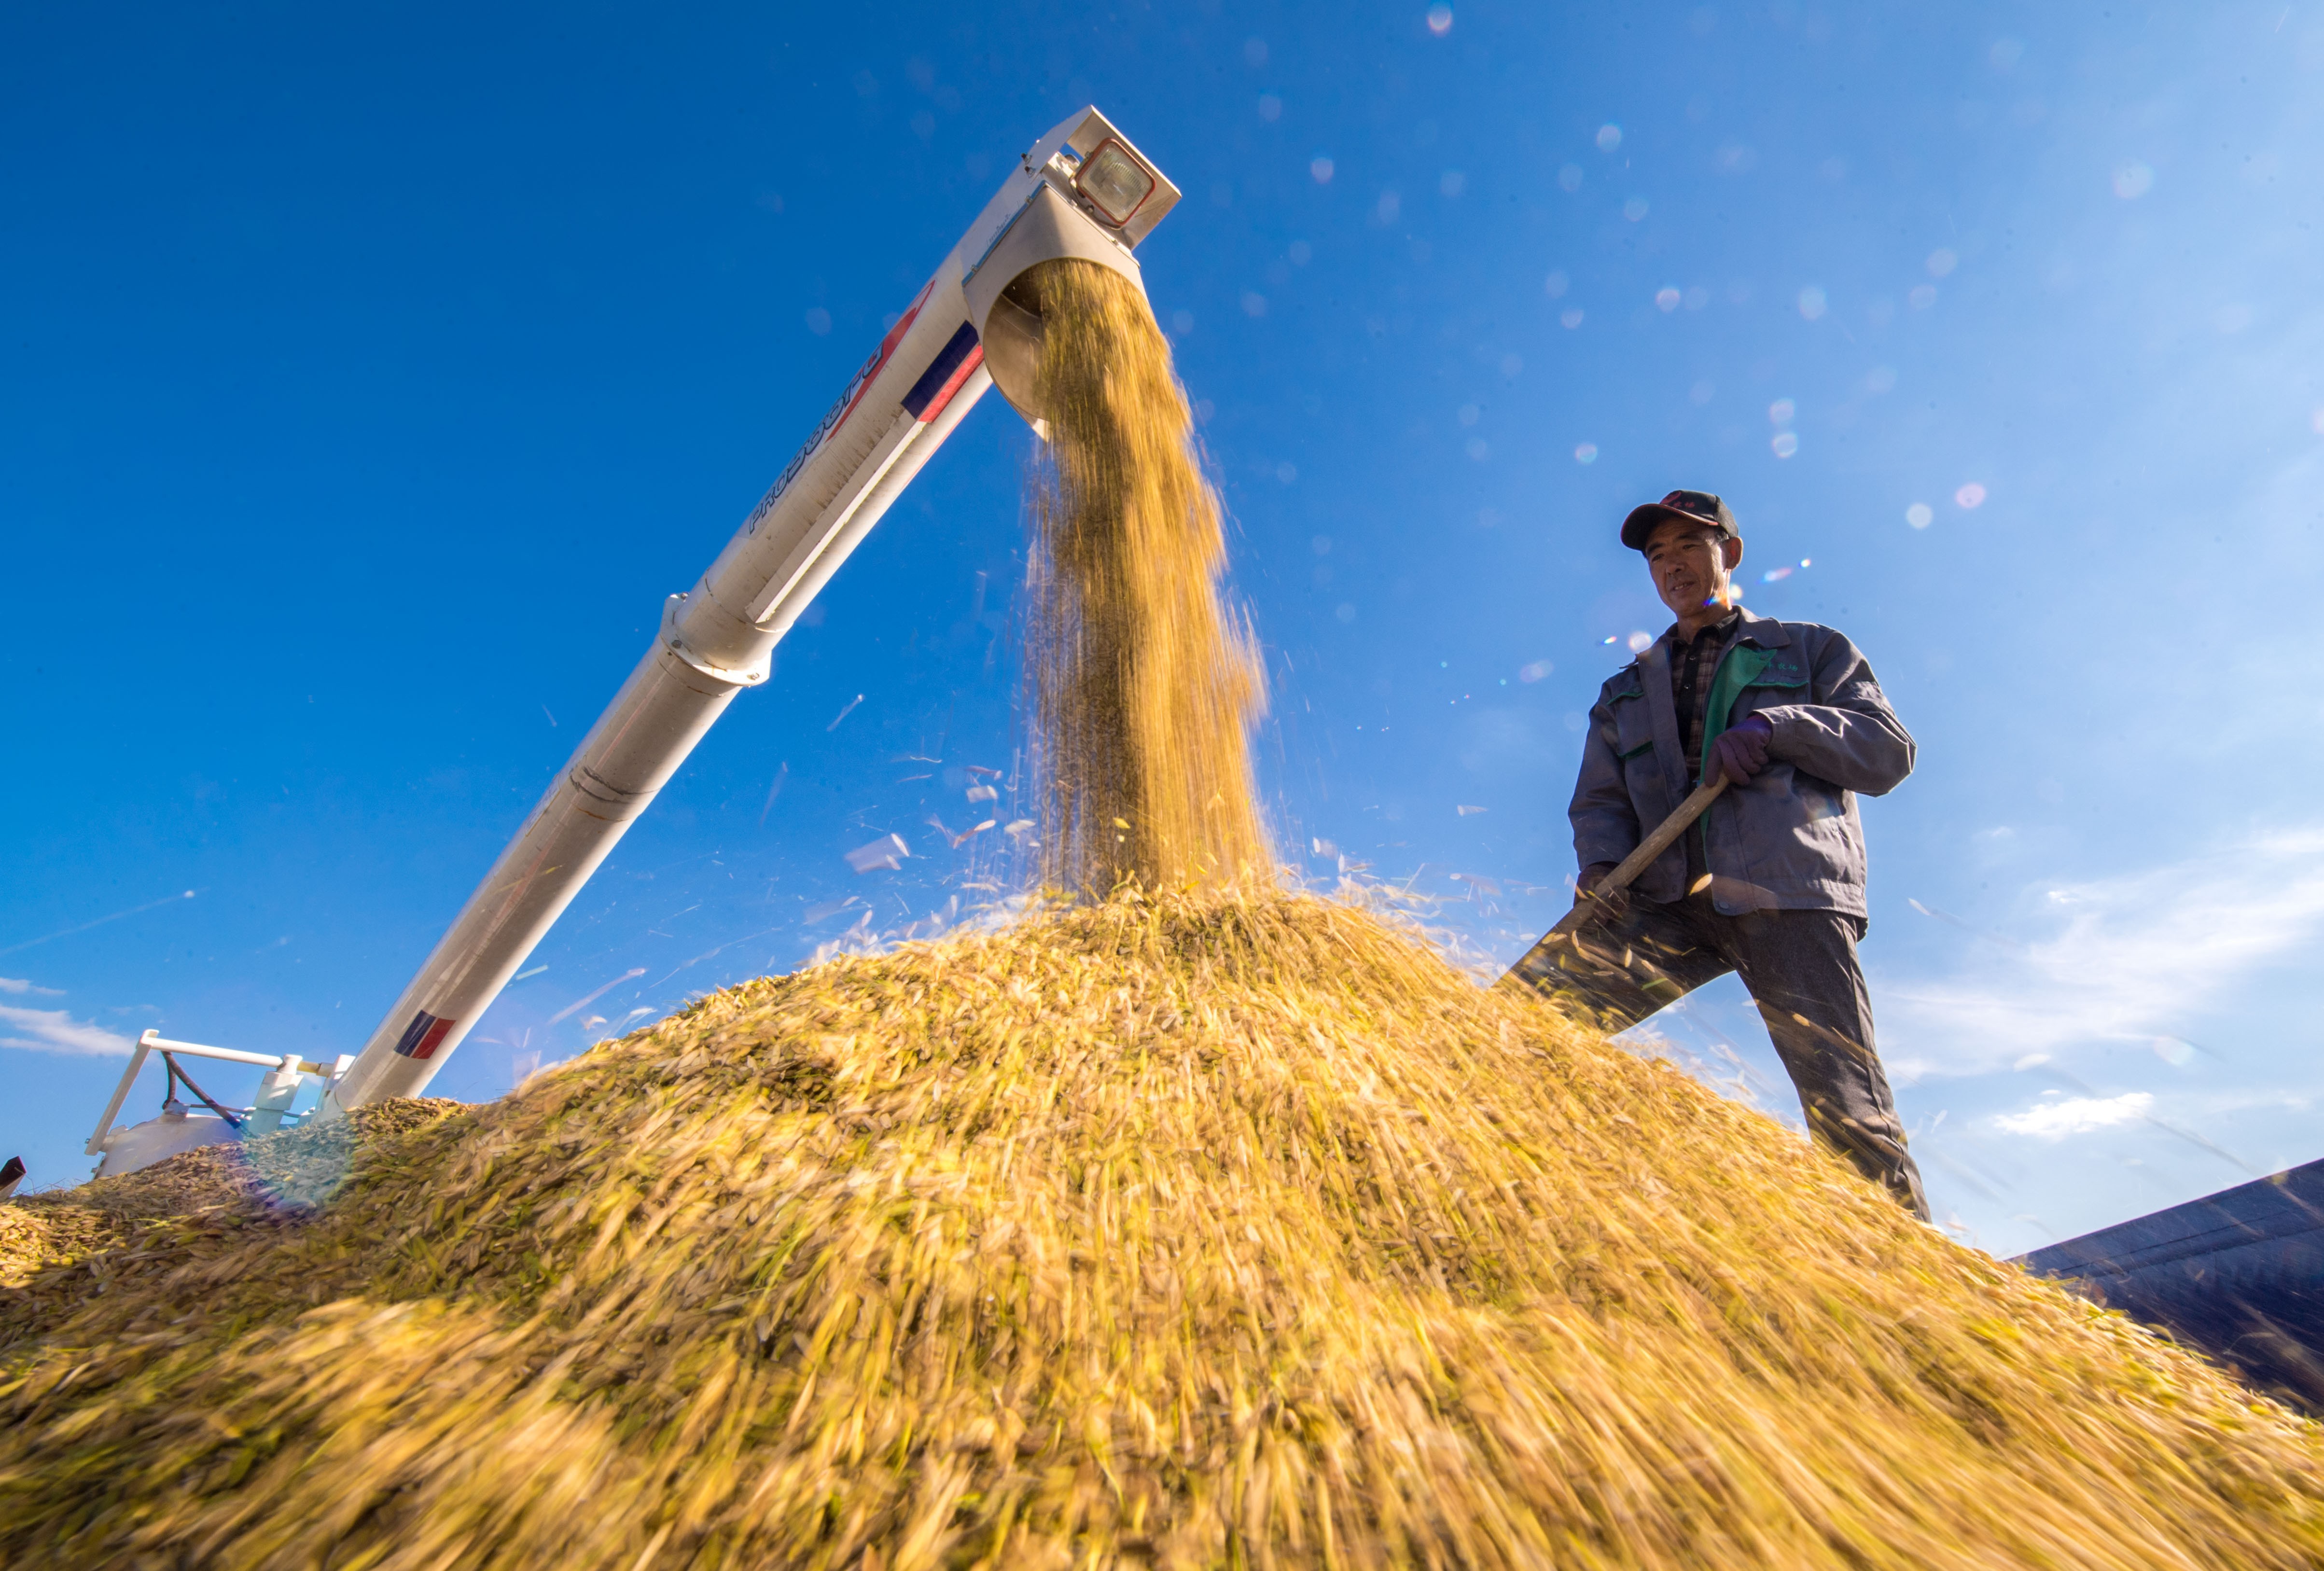 Agriculture has long been the bedrock of China’s political and economic stability as it stands at the heart of the national security strategy for a nation where around 60 per cent of population live in urban areas. Photo: Xinhua